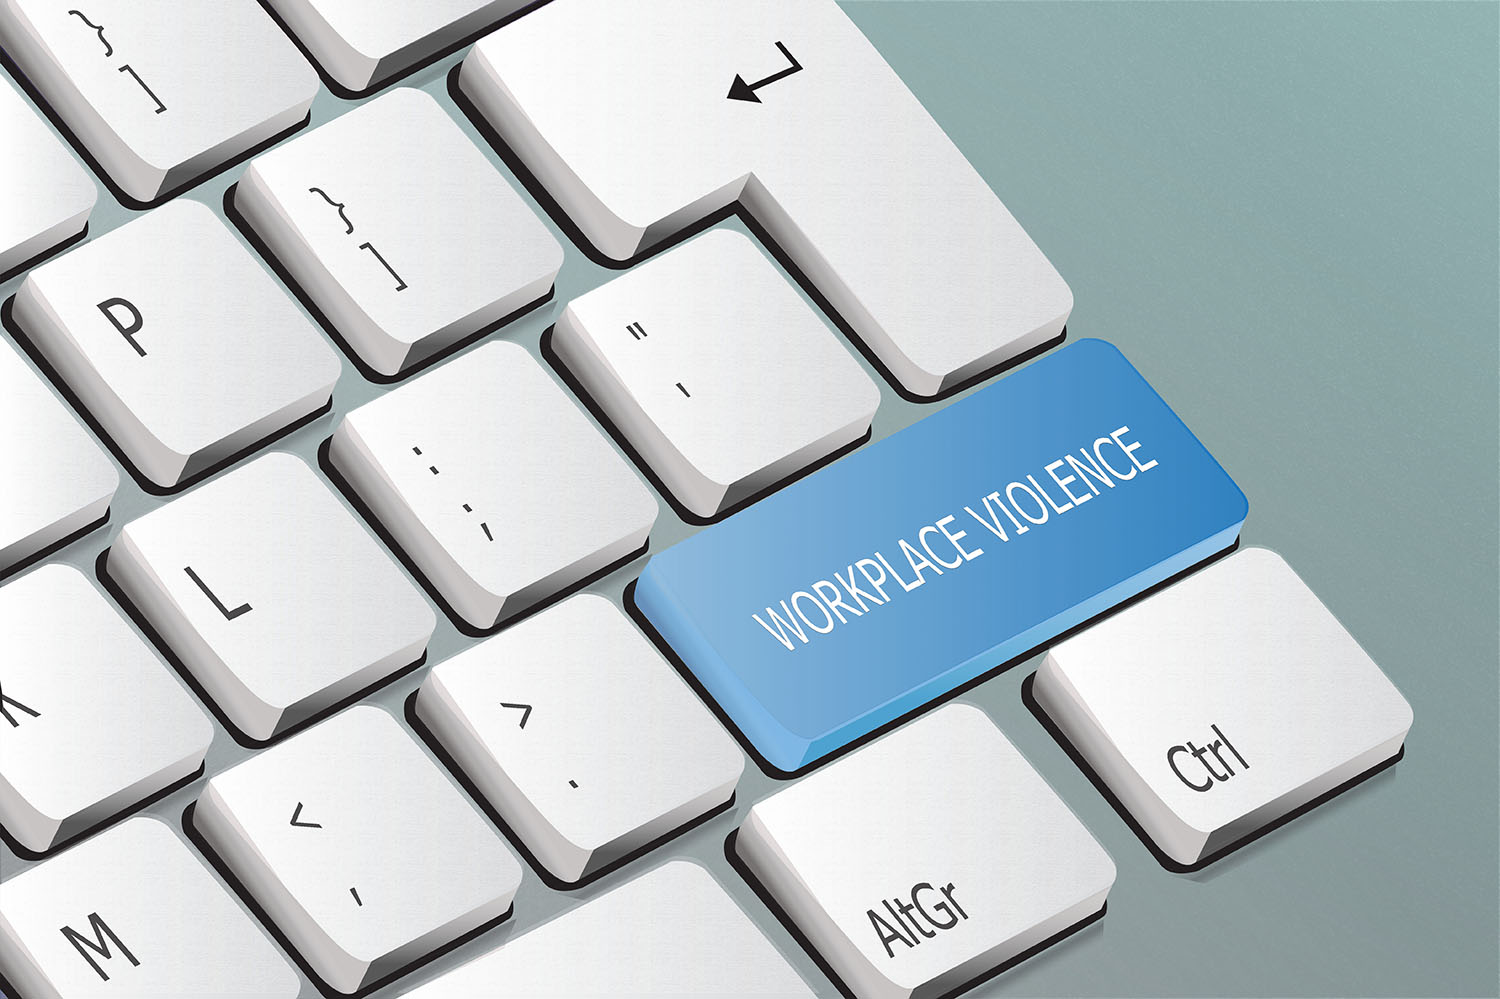 Image of keyboard with a blue button named workplace violence